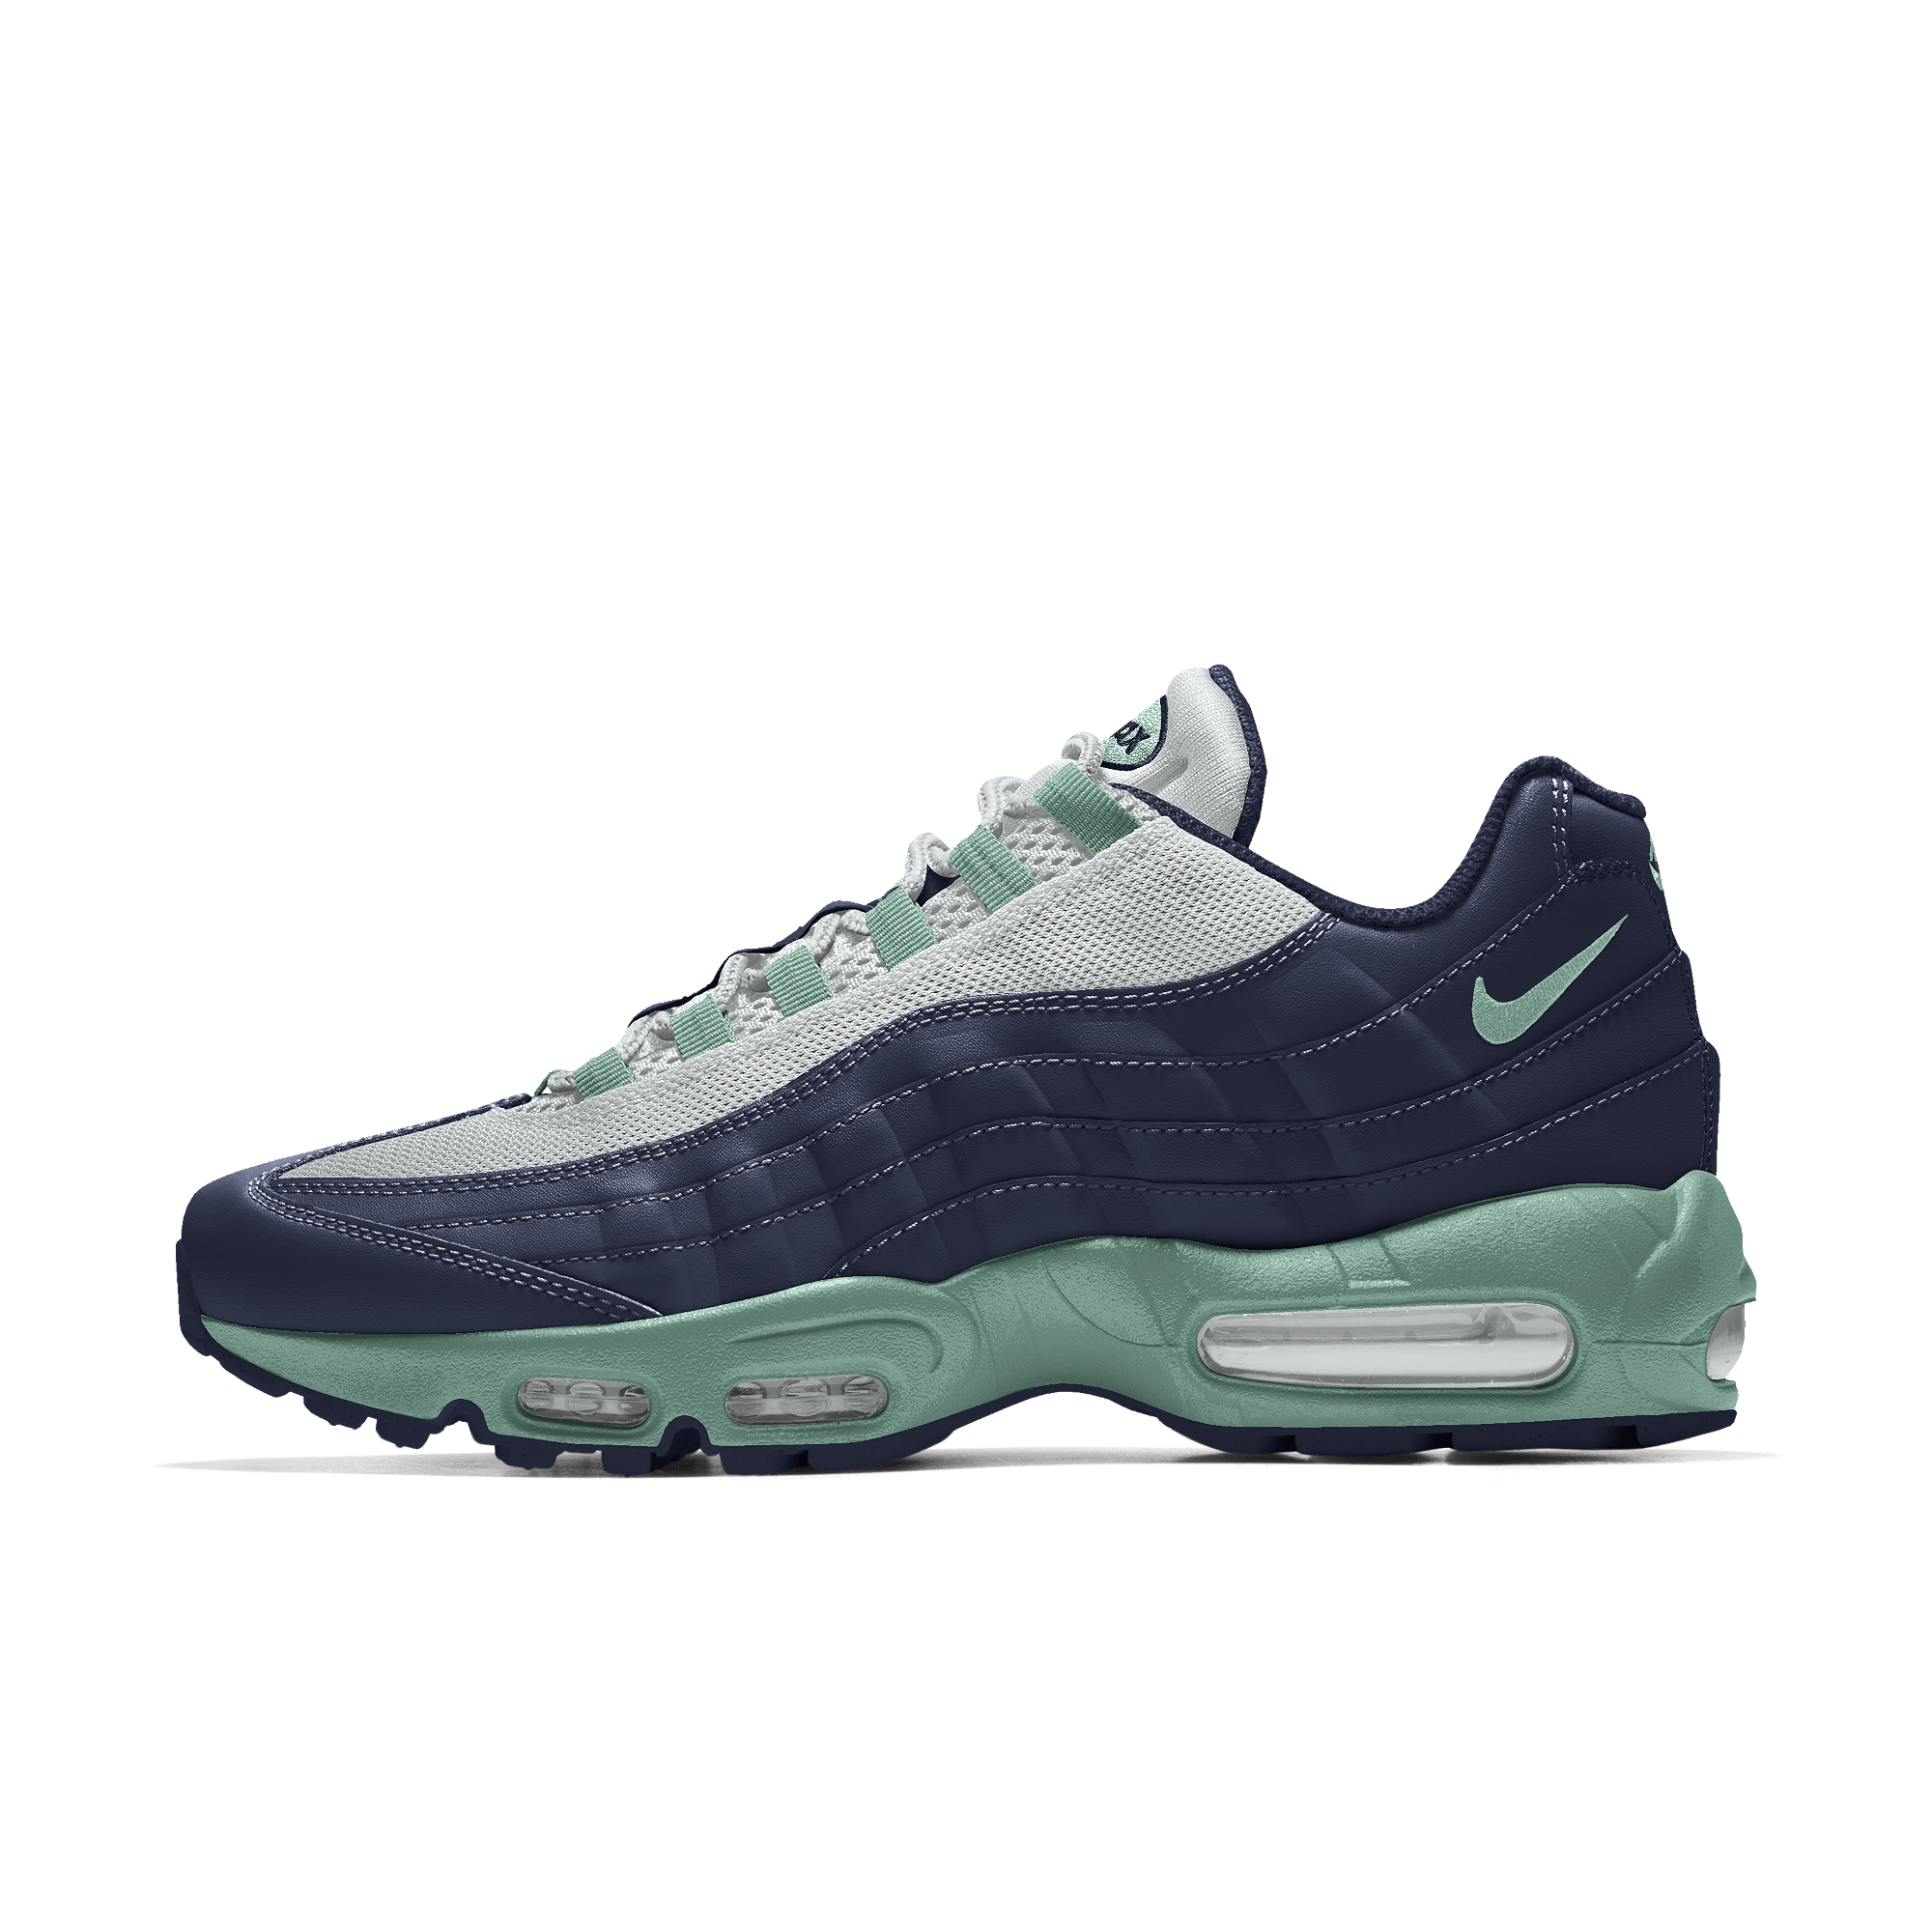 Scarpa personalizzabile Nike Air Max 95 By You - Donna - Bianco